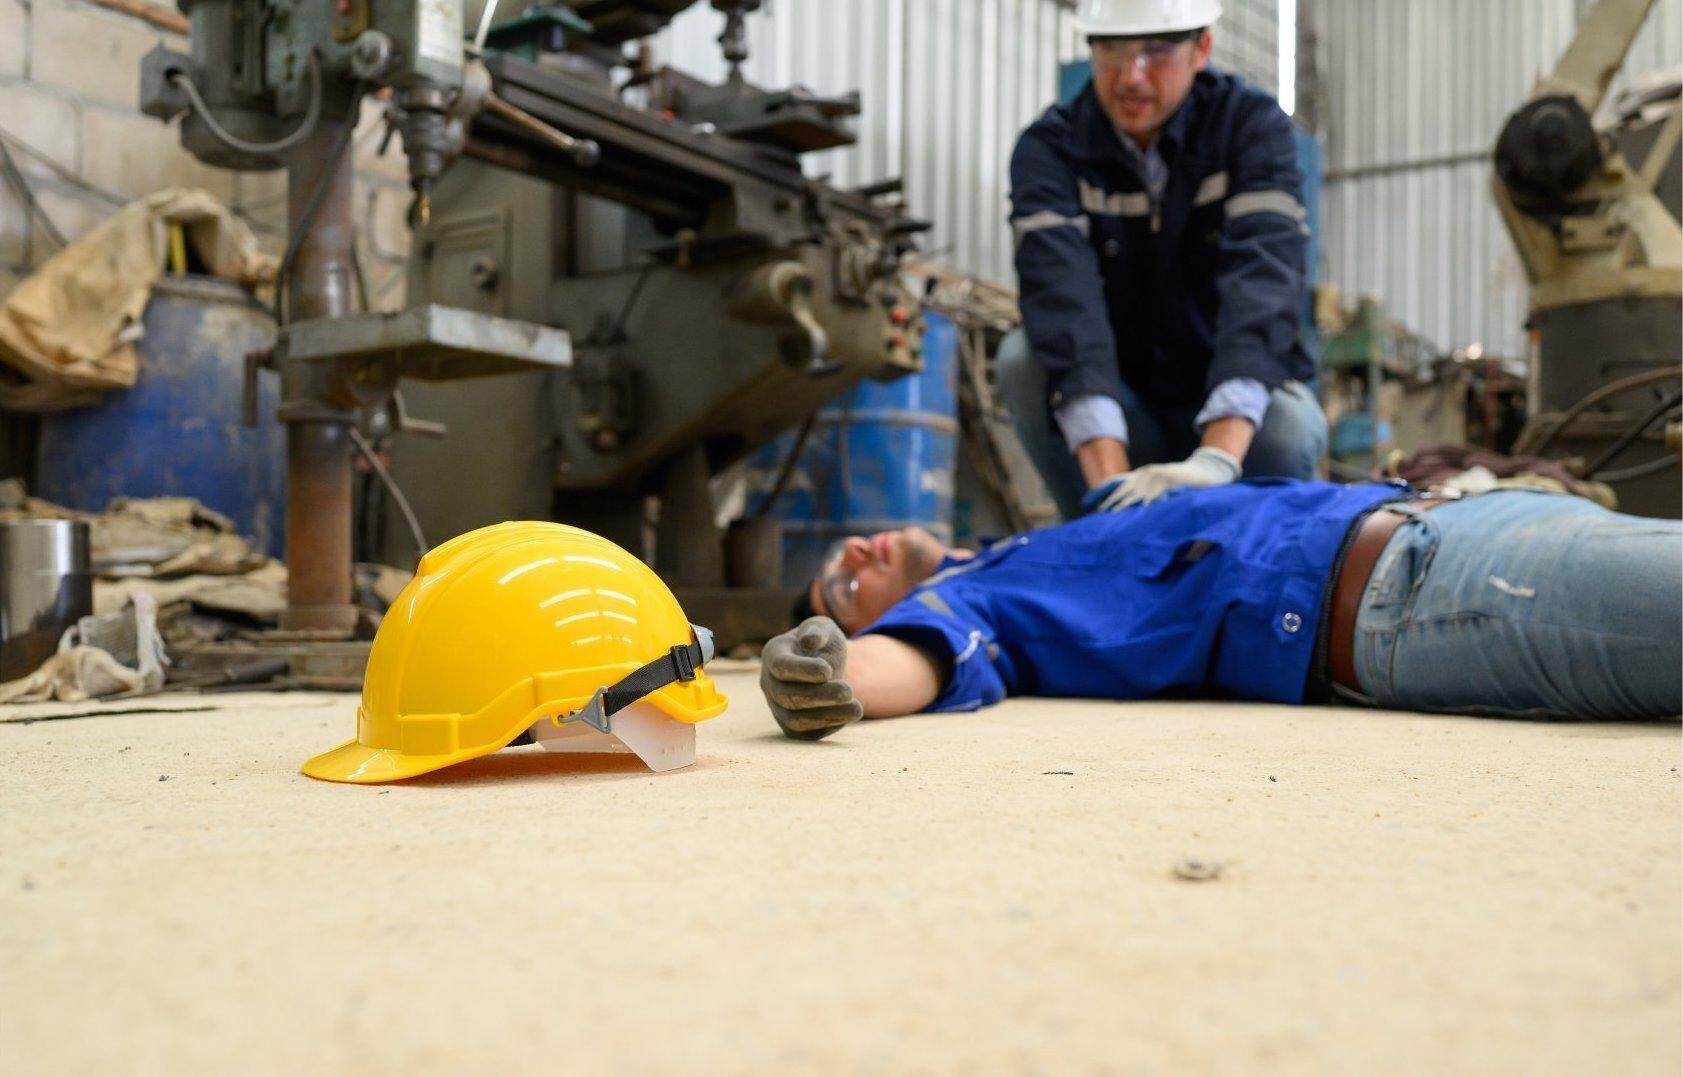 An unconscious man who has been injured on the job who will file for workers compensation in Perry, Georgia